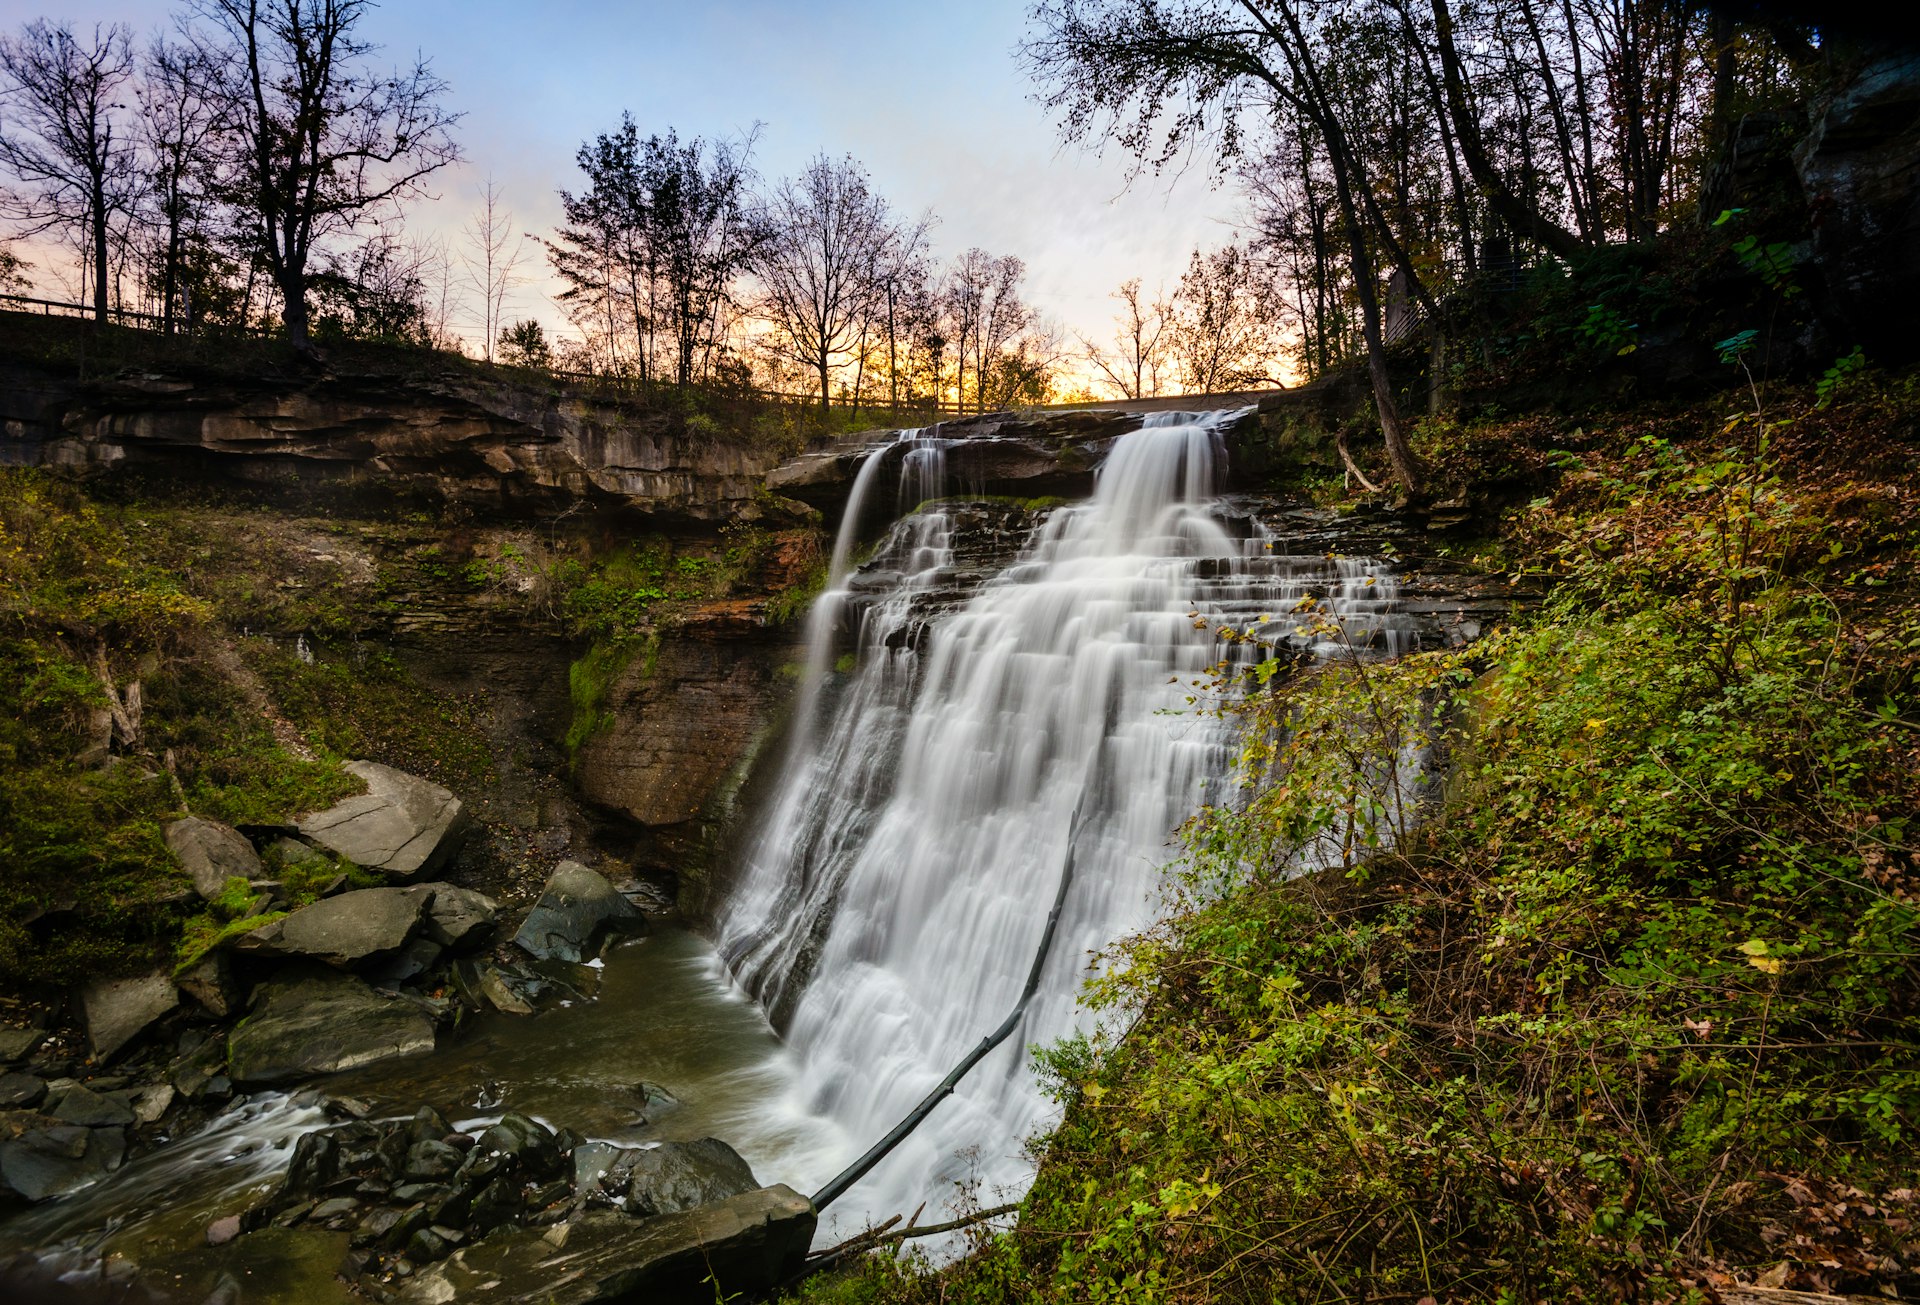 White water spills over narrow stair-stepped rocks that form Brandywine falls in  in Cuyahoga National Park. All around is lush foliage from surrounding shrubs, while on the top of the falls are the black outlines of larger trees against a faded sunset